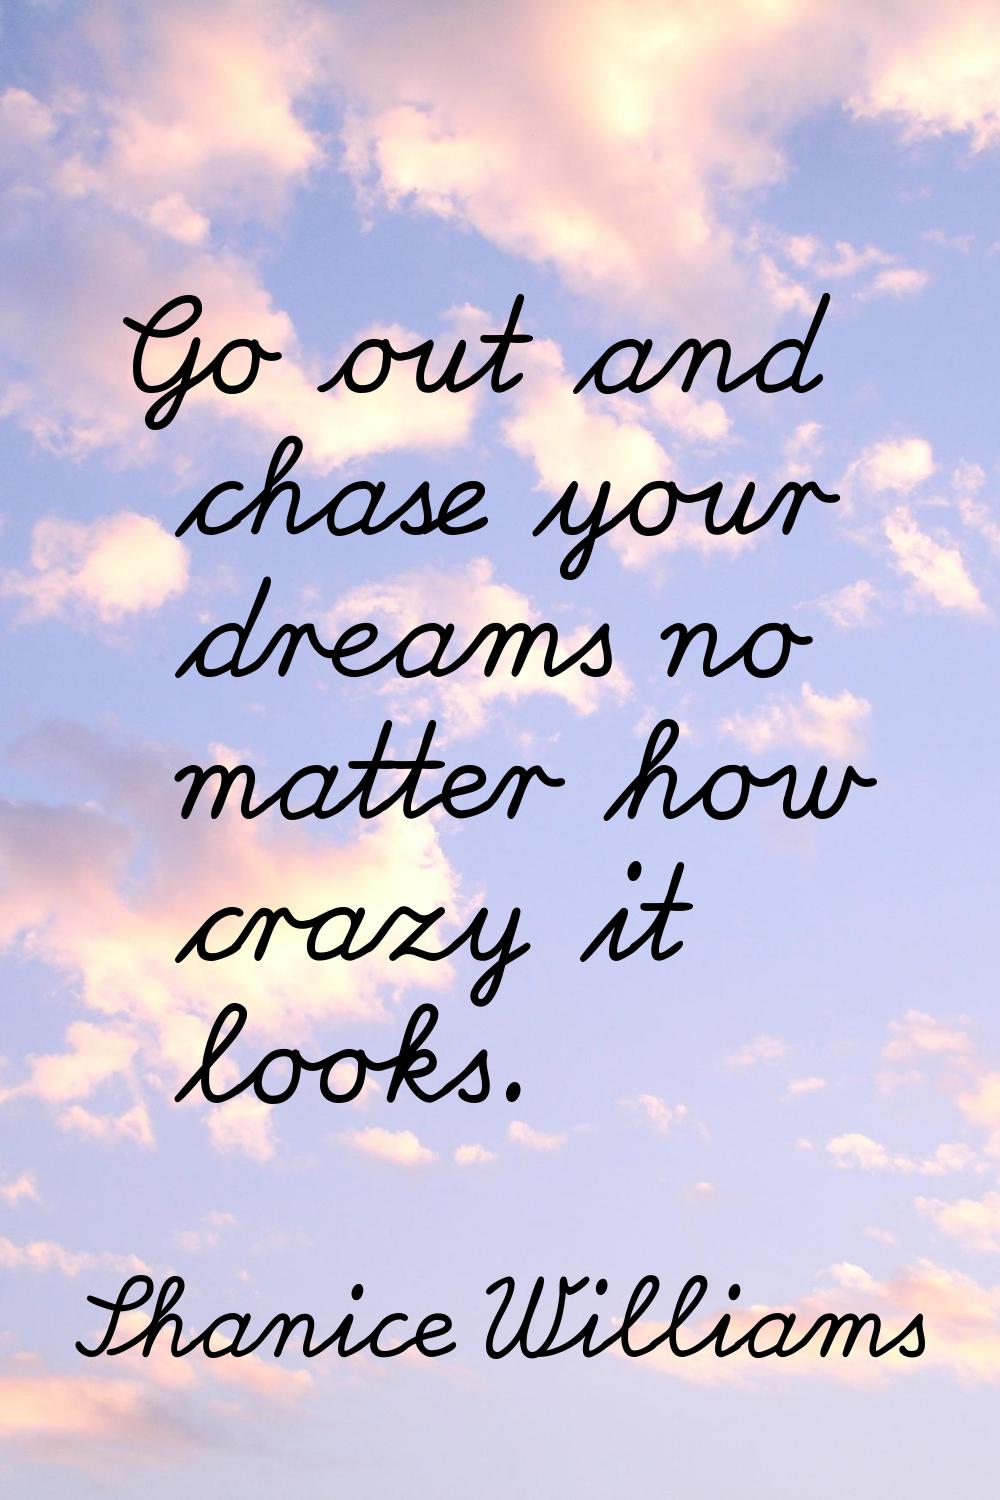 Go out and chase your dreams no matter how crazy it looks.